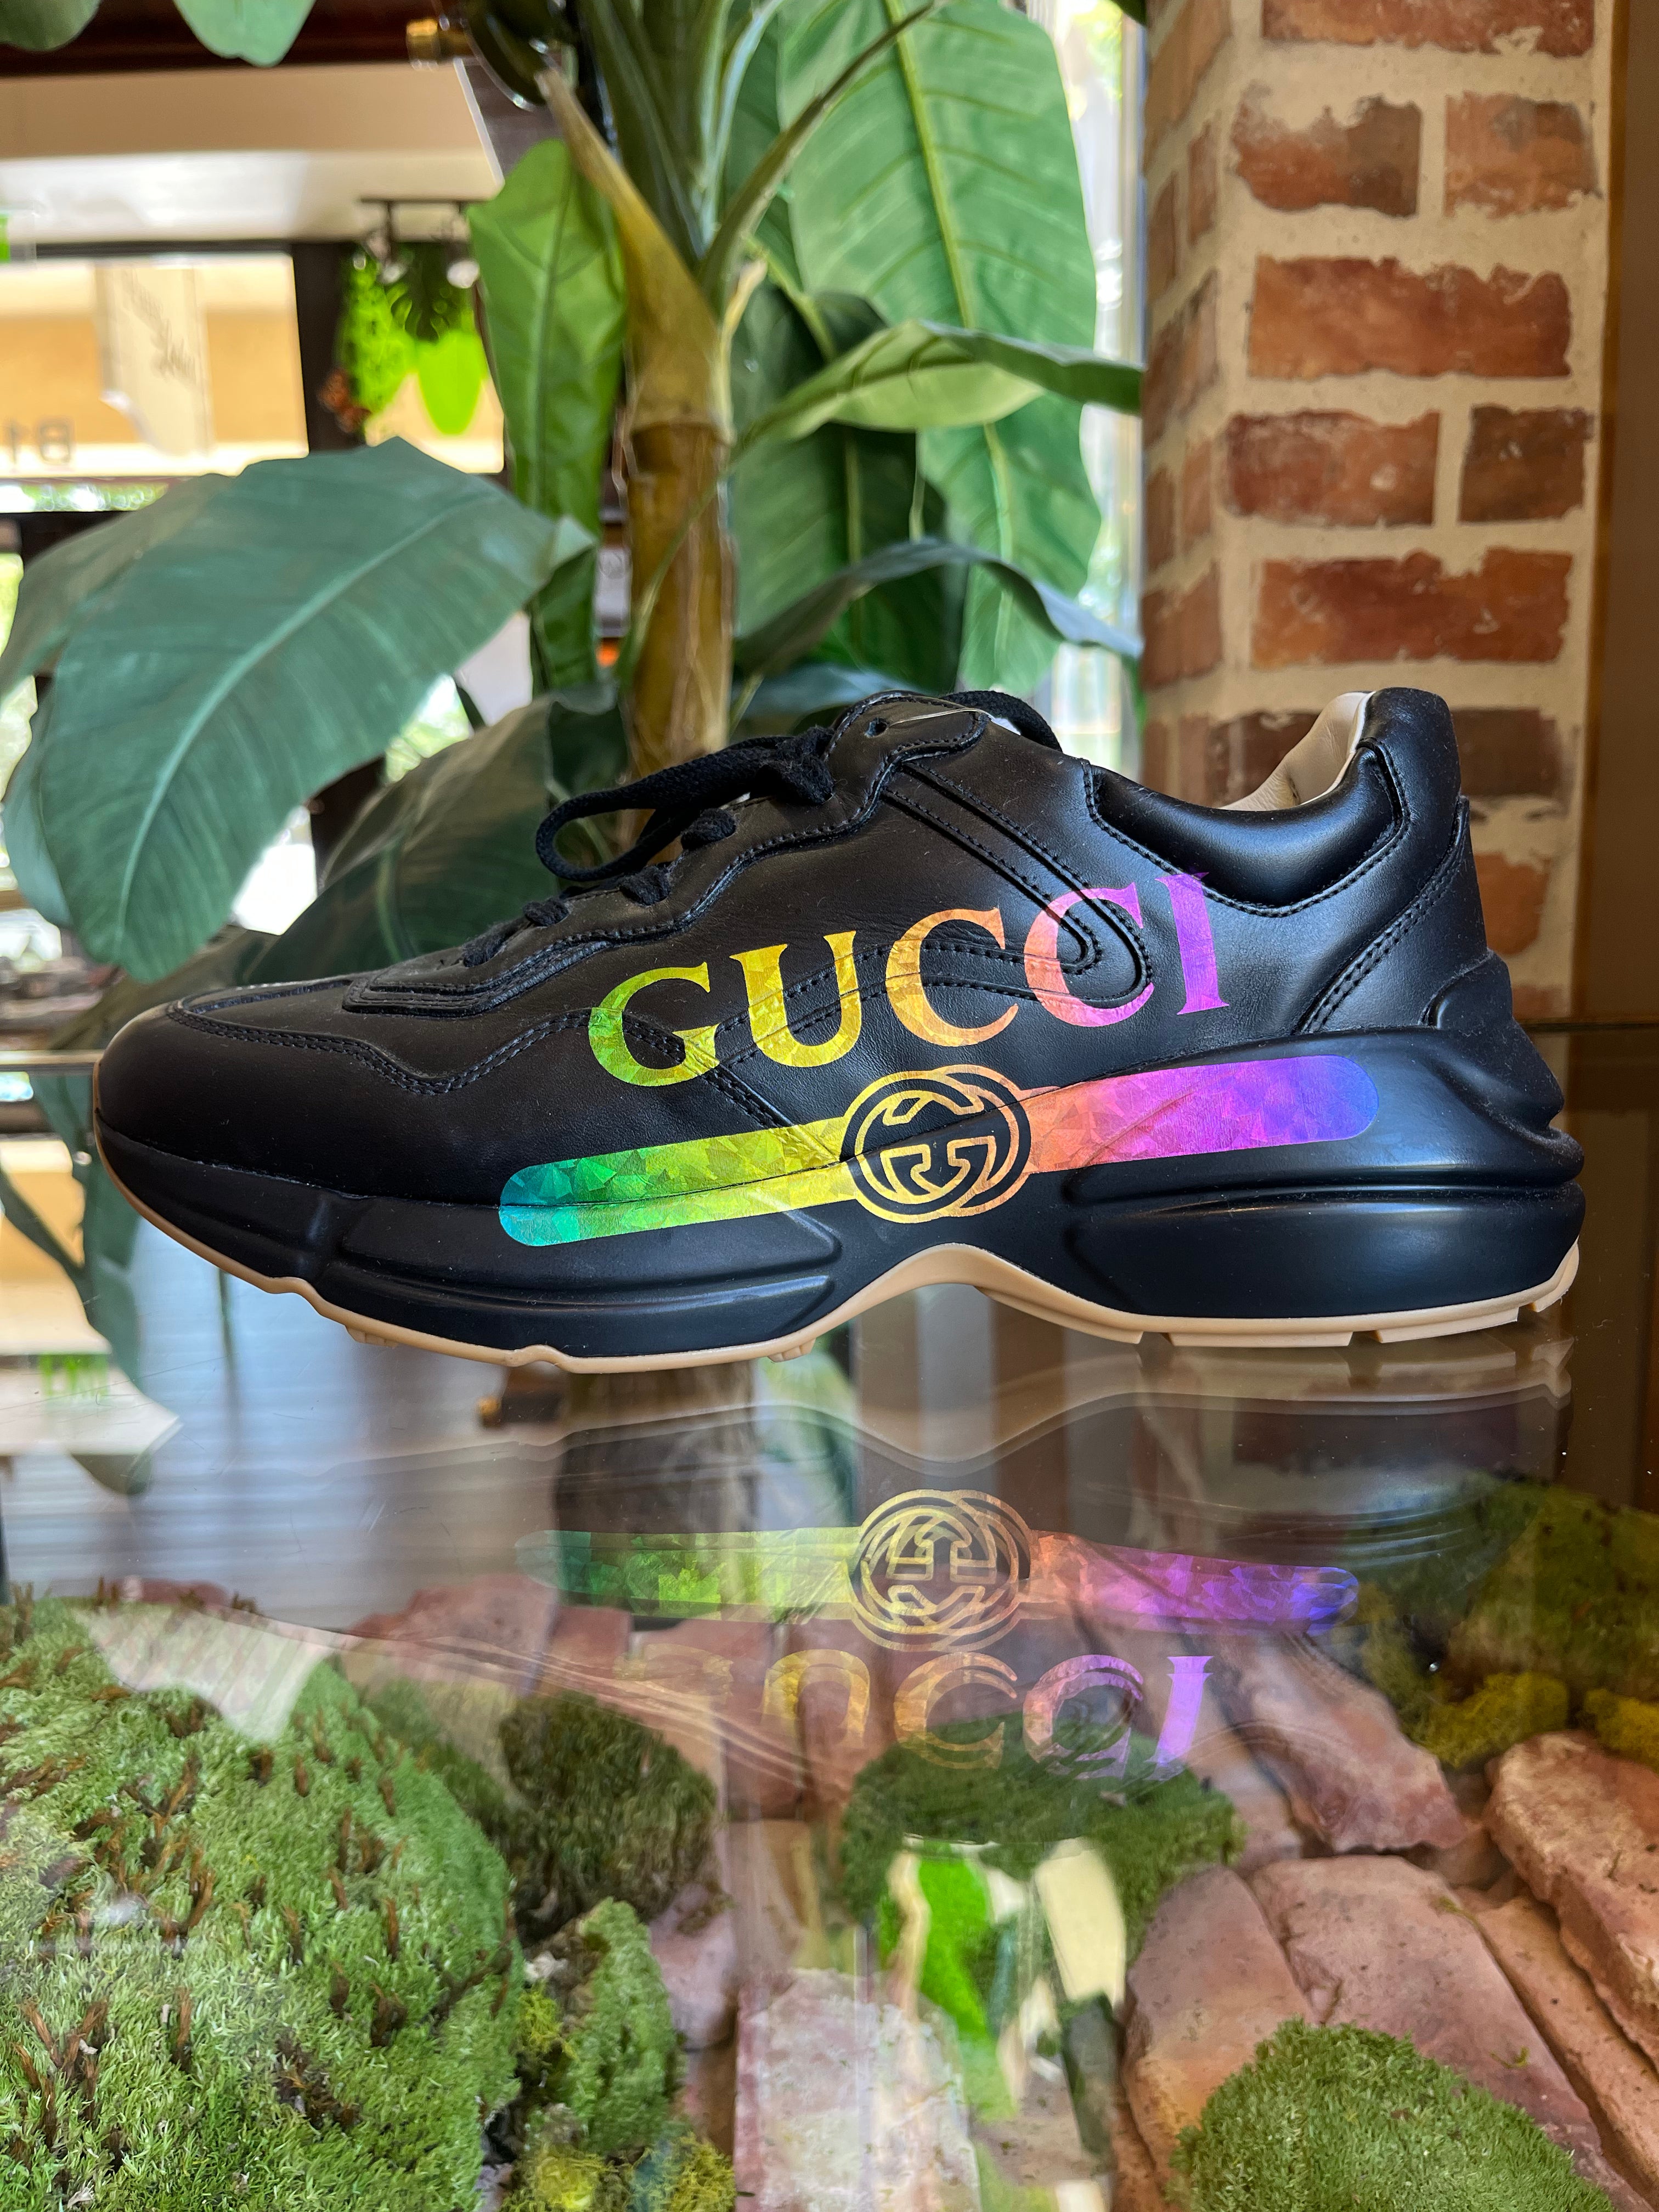 Gucci new sneakers  Casual shoes women sneakers, Louis vuitton shoes  heels, Gucci shoes sneakers